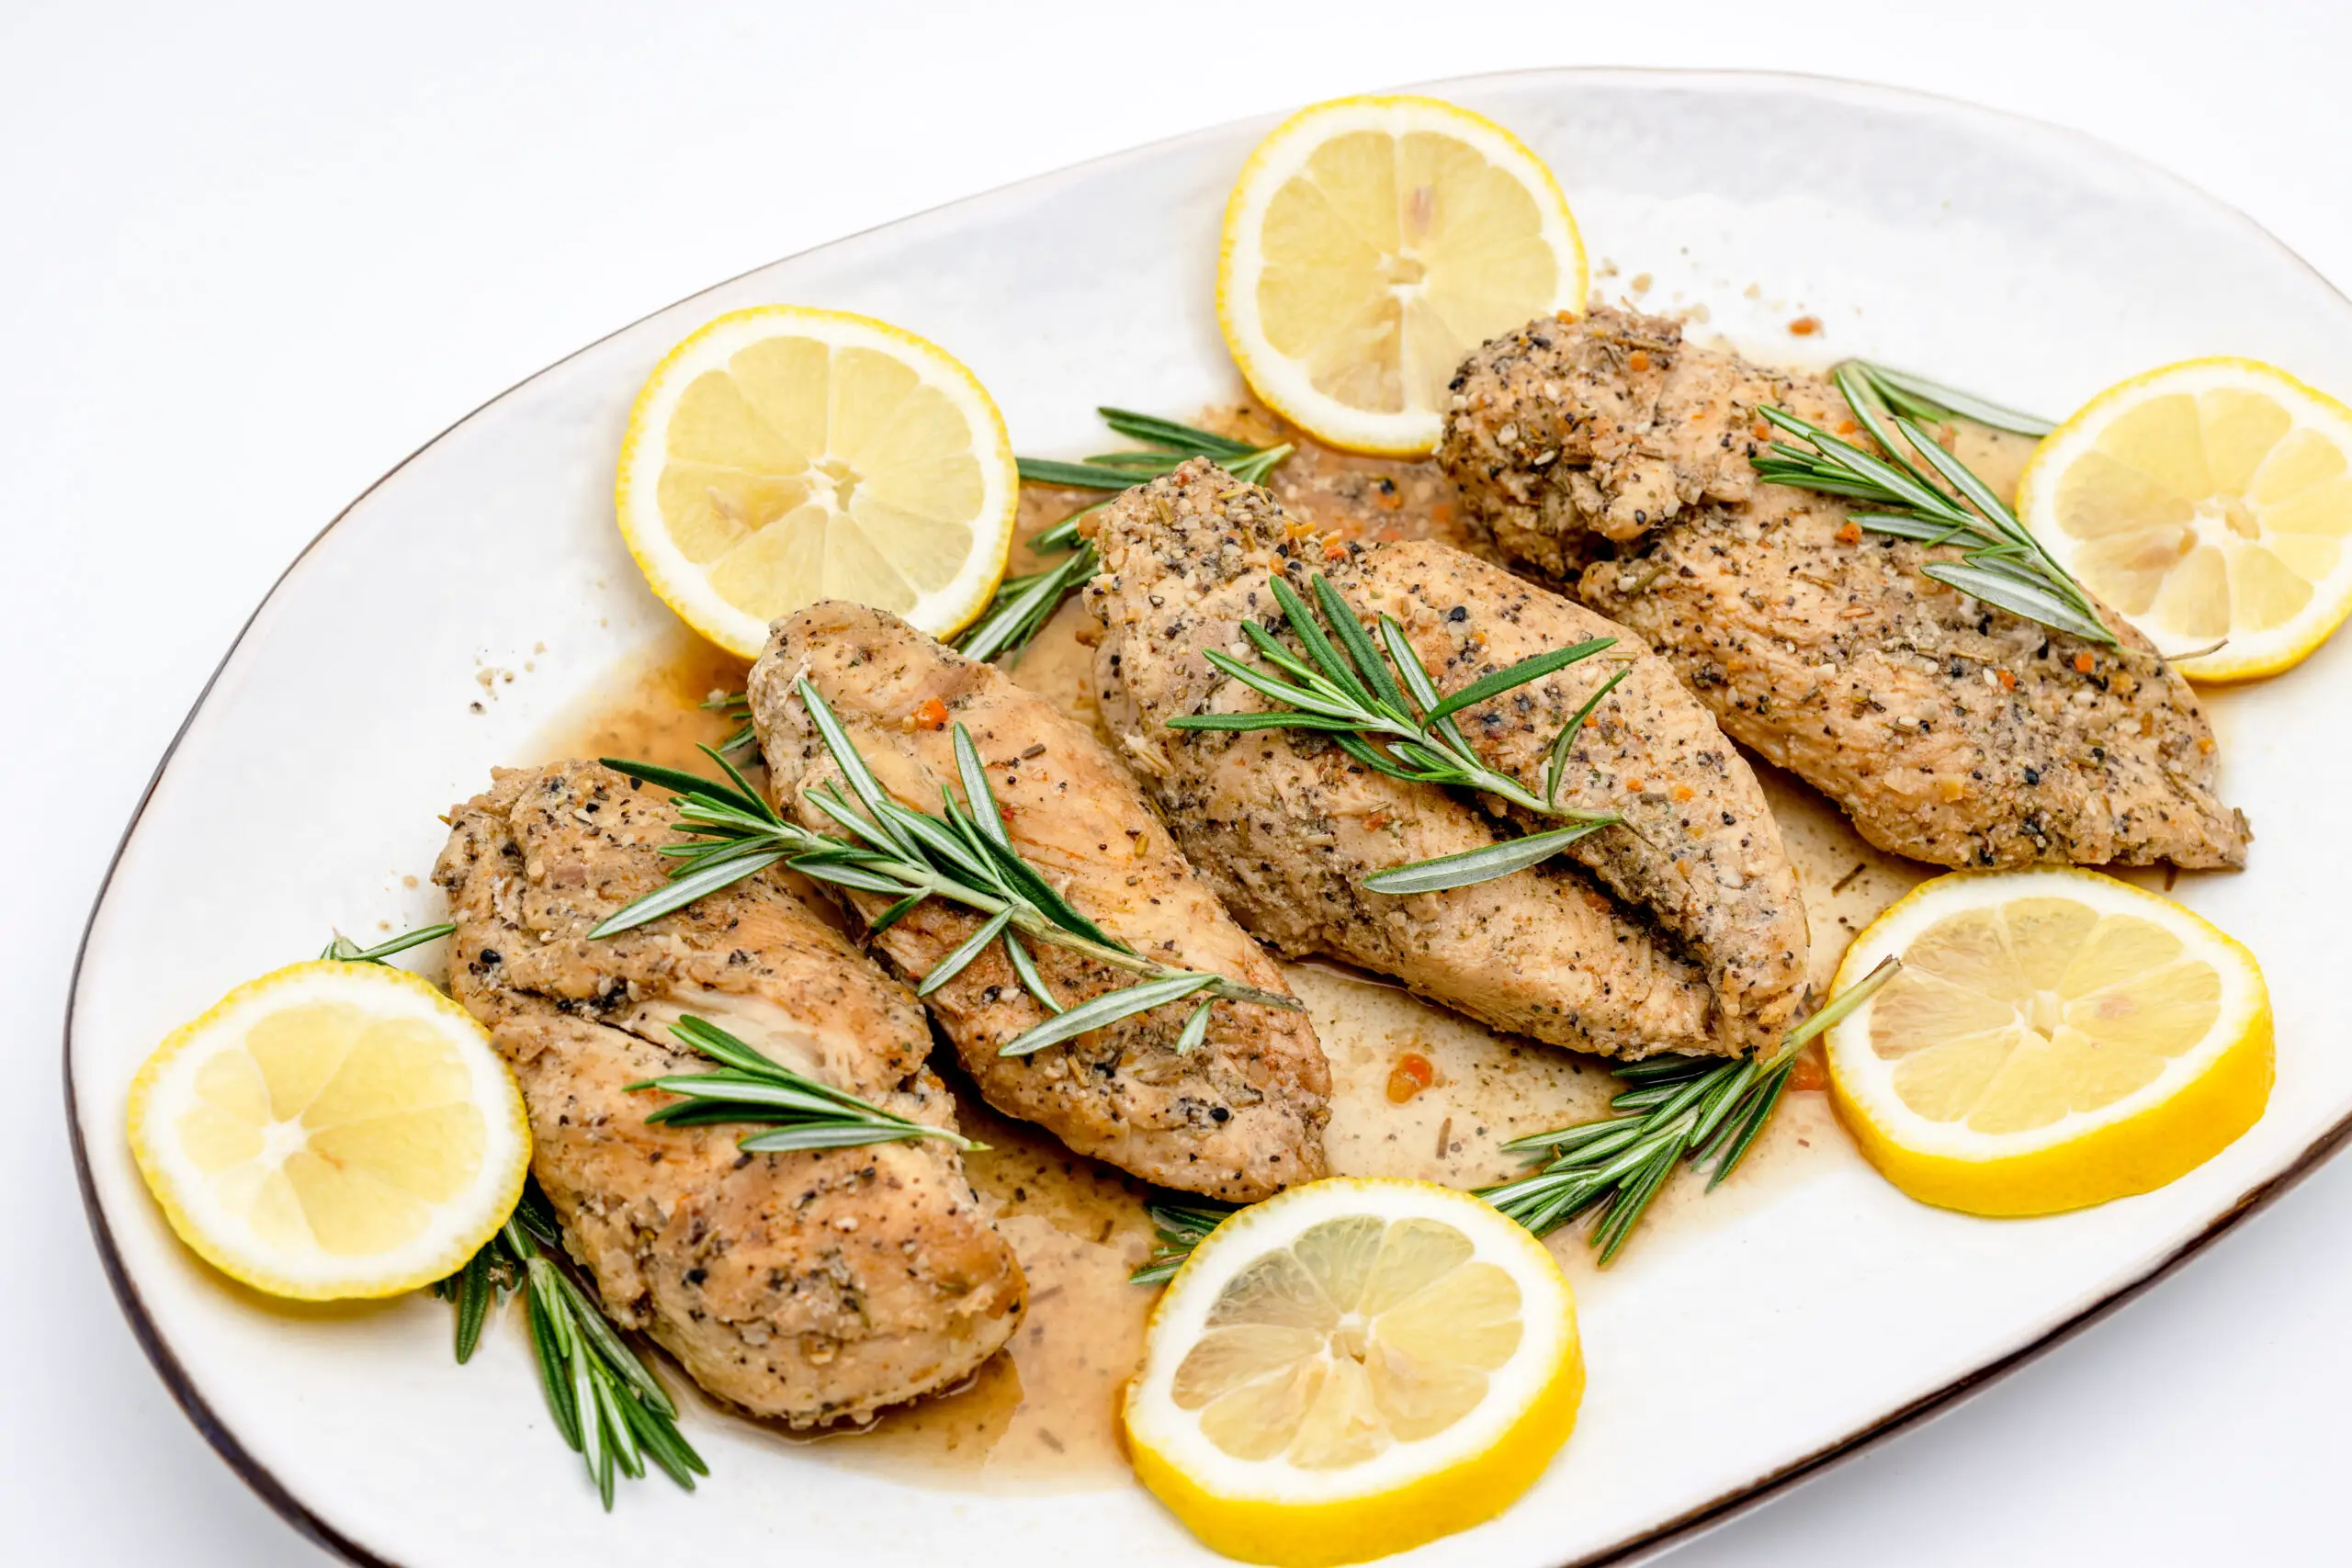 Garlic, rosemary, and chicken breast are deliciously combined for a perfect family dinner.